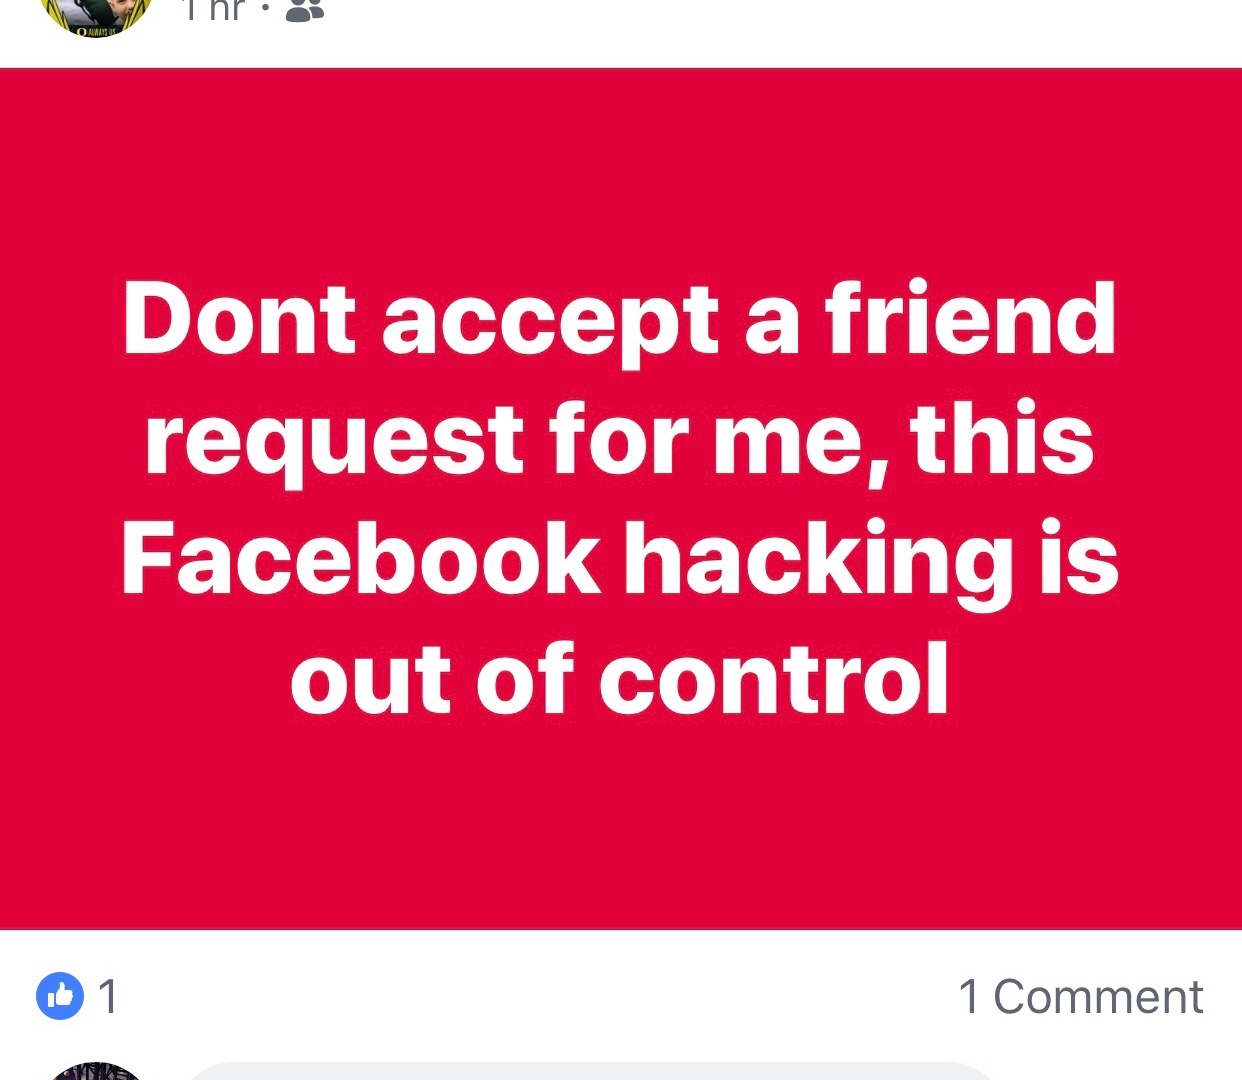 How Fake Facebook Login Page is Used to Hack Facebook Accounts